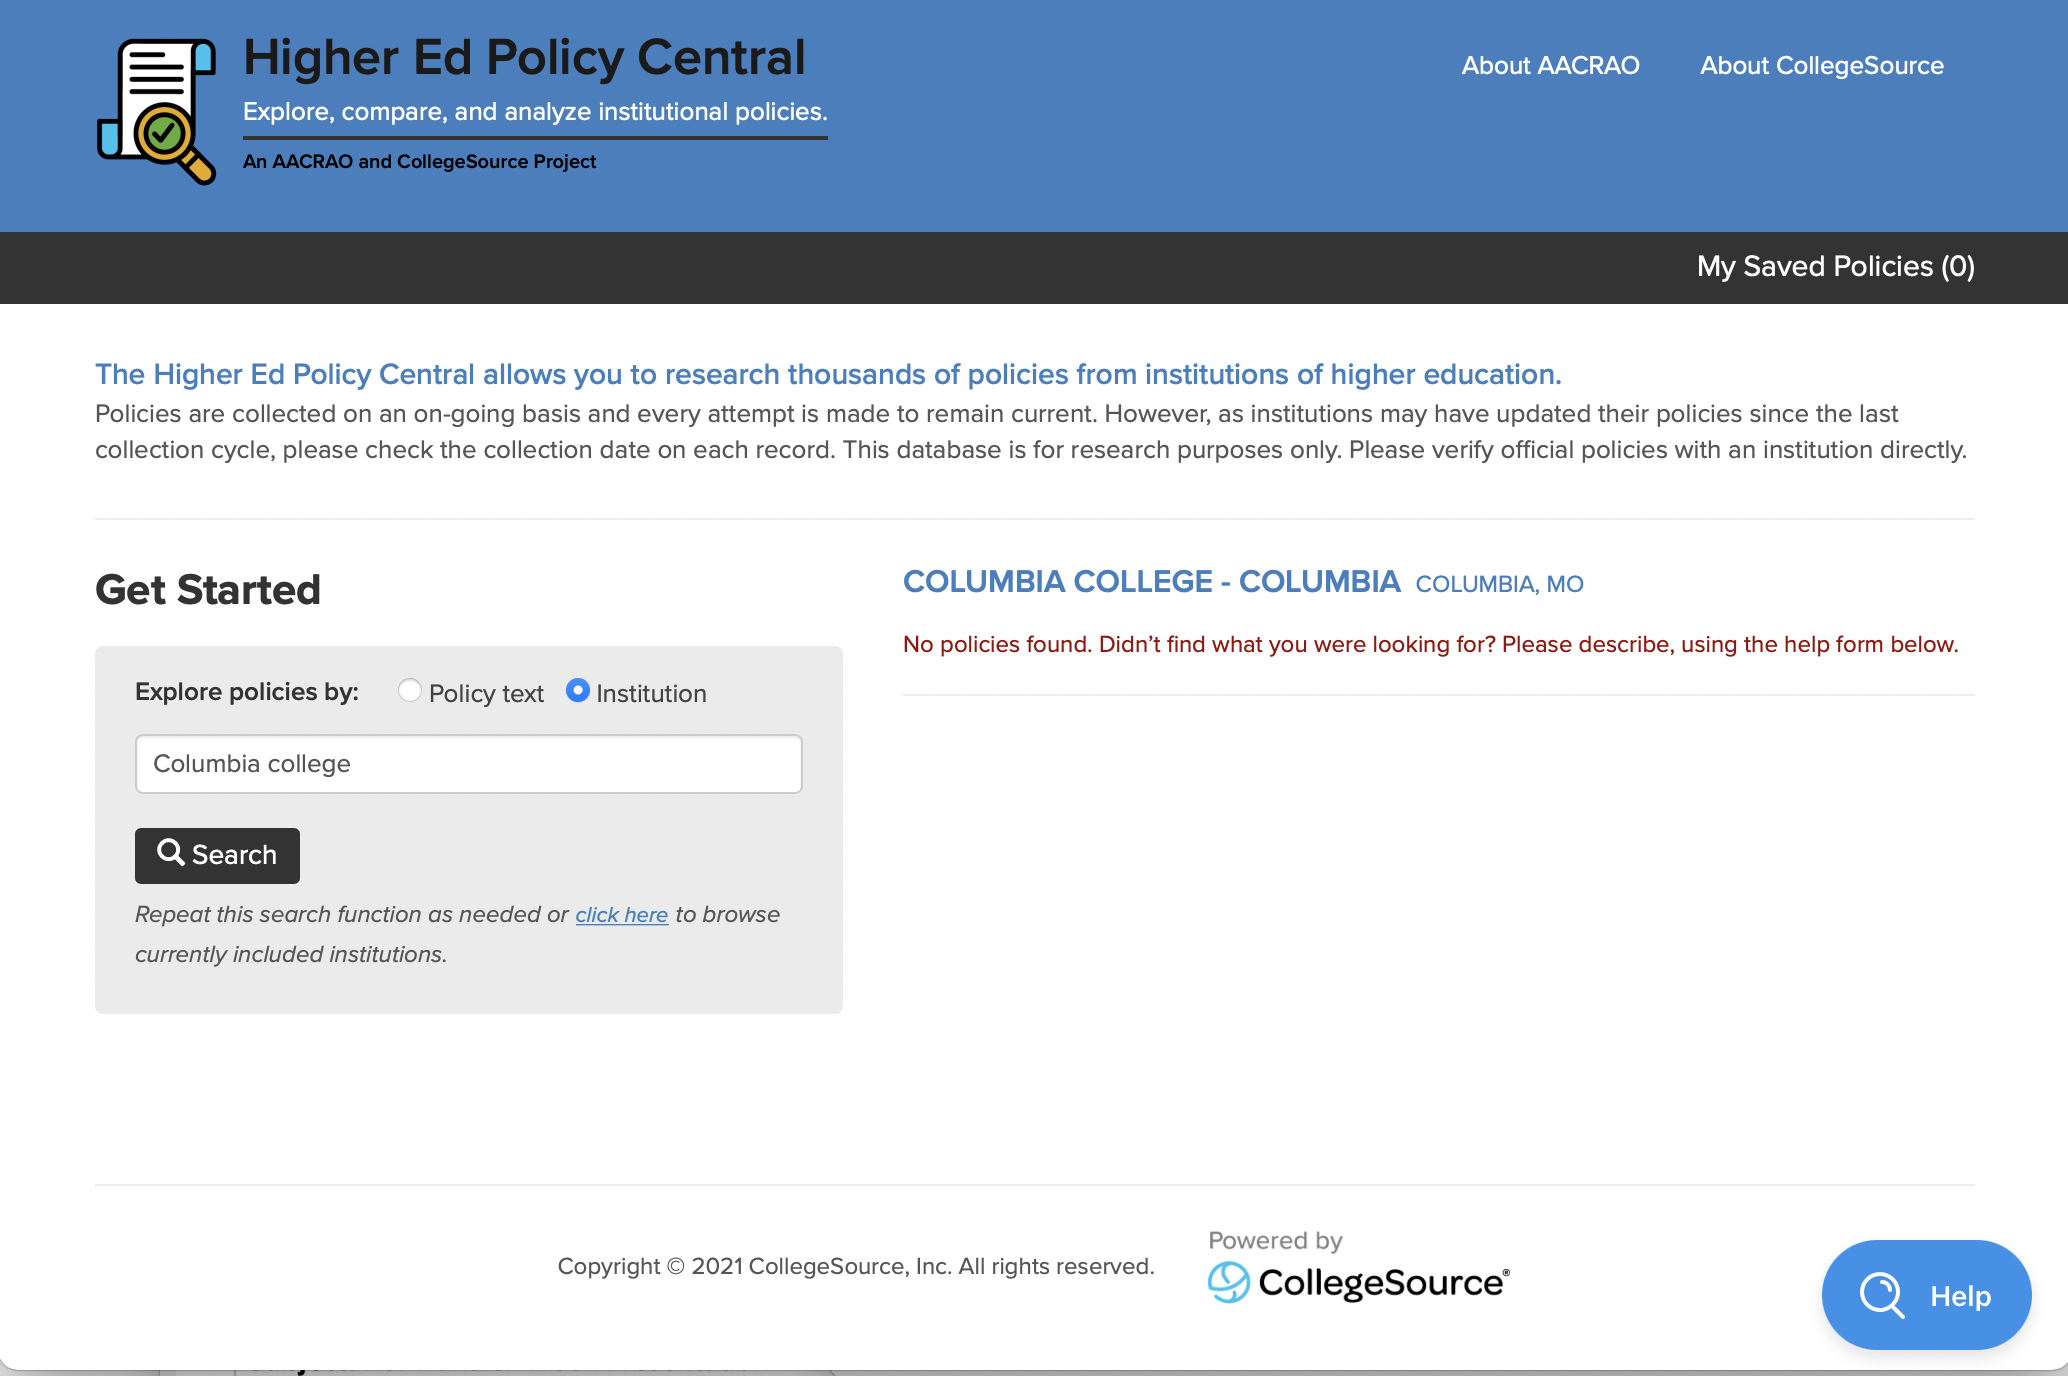 screenshot of higher education policy database help message